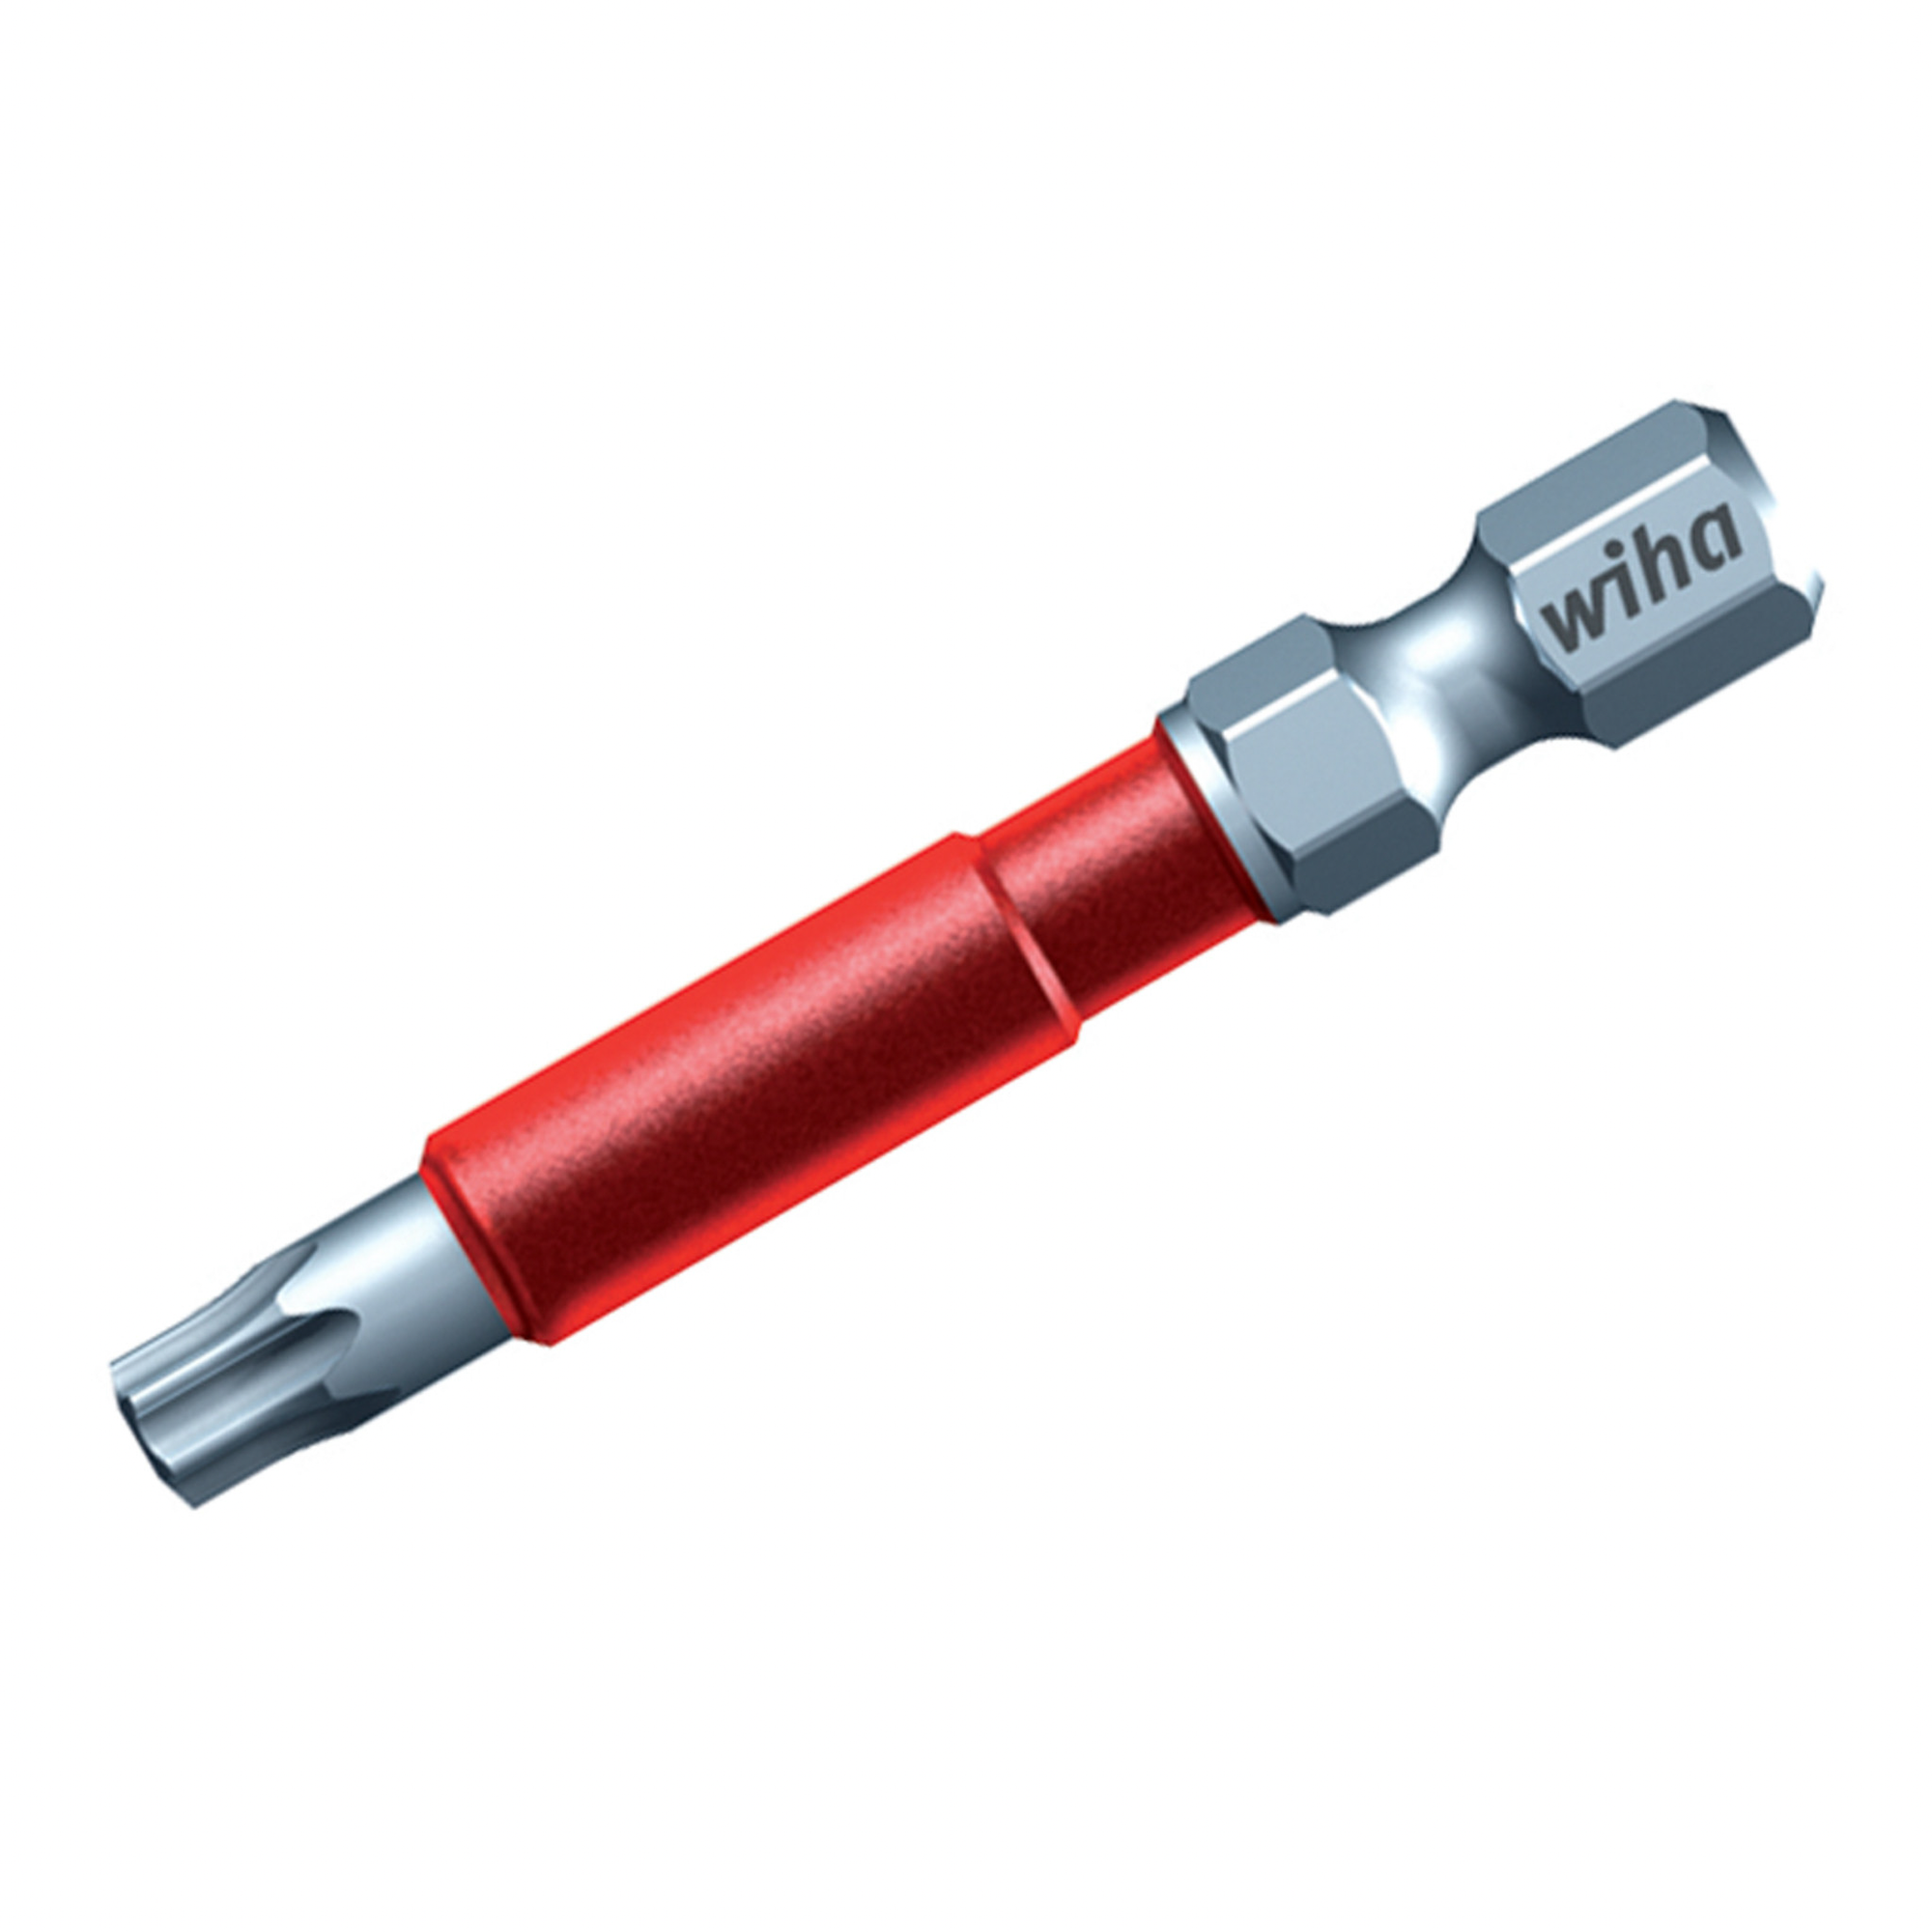 MaxxTor Impact Bits Will Have You Coming Back For More